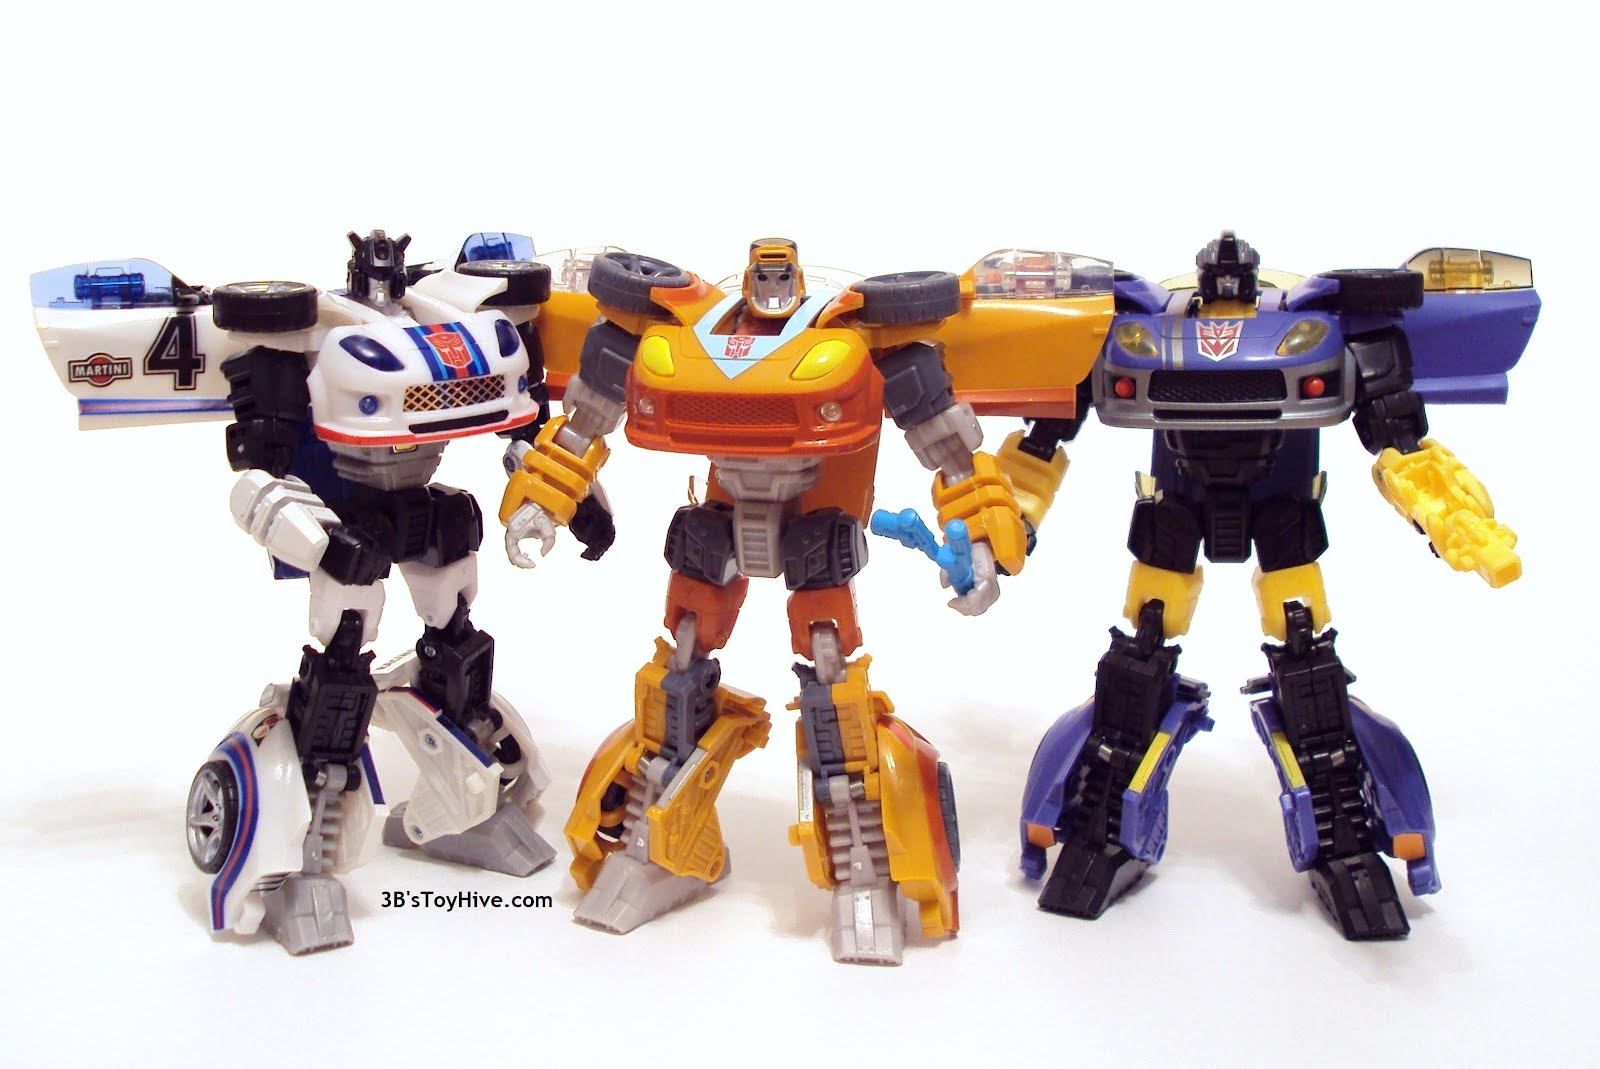 3B's Toy Hive: Transformers: Generations, Wheelie - Review